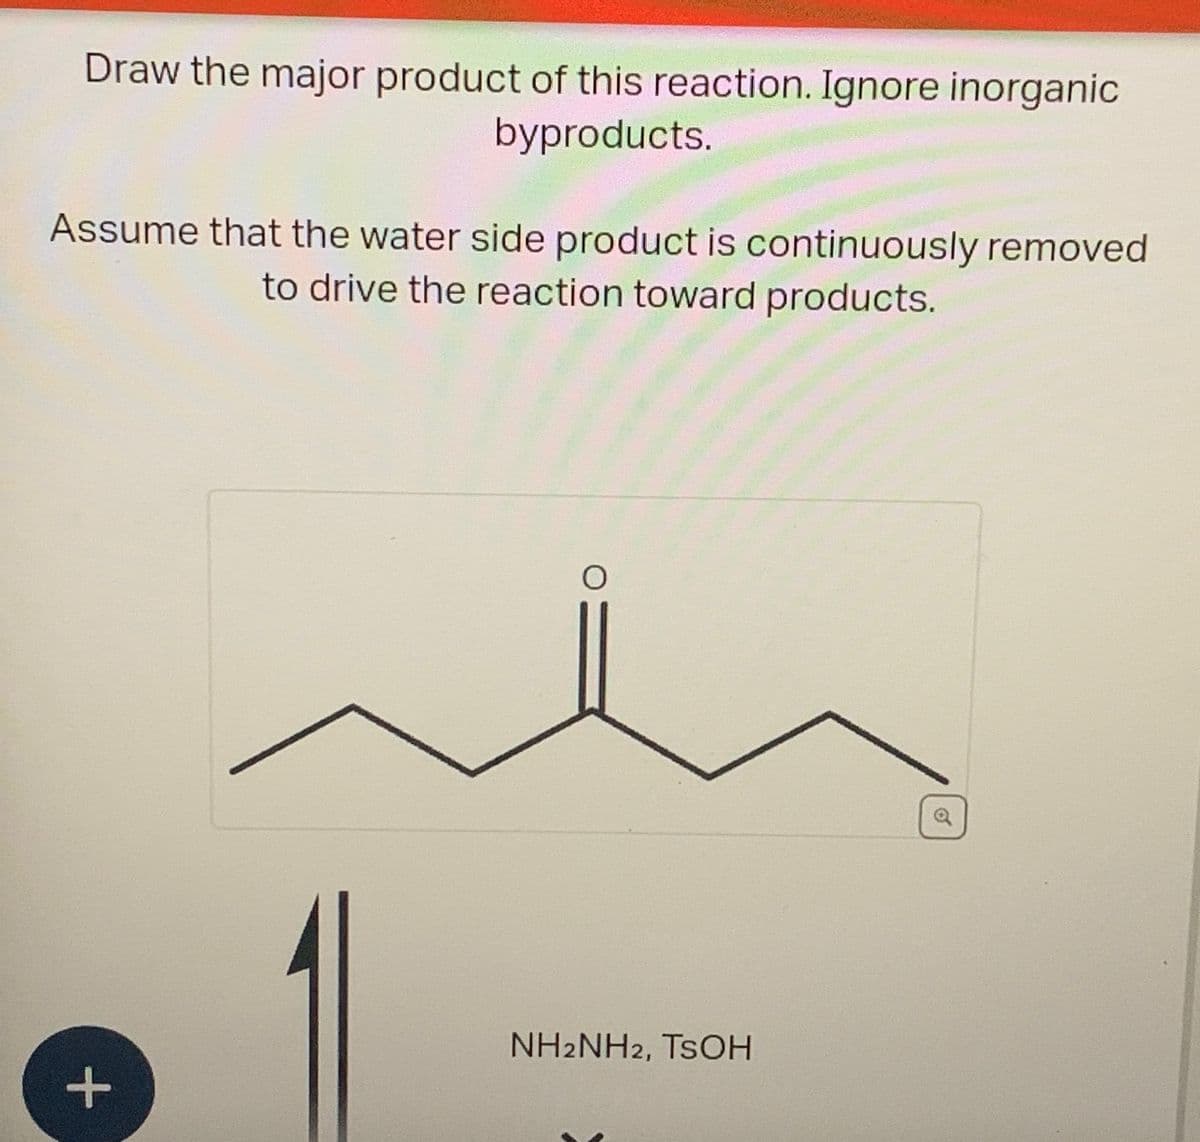 Draw the major product of this reaction. Ignore inorganic
byproducts.
Assume that the water side product is continuously removed
to drive the reaction toward products.
+
NH2NH2, TSOH